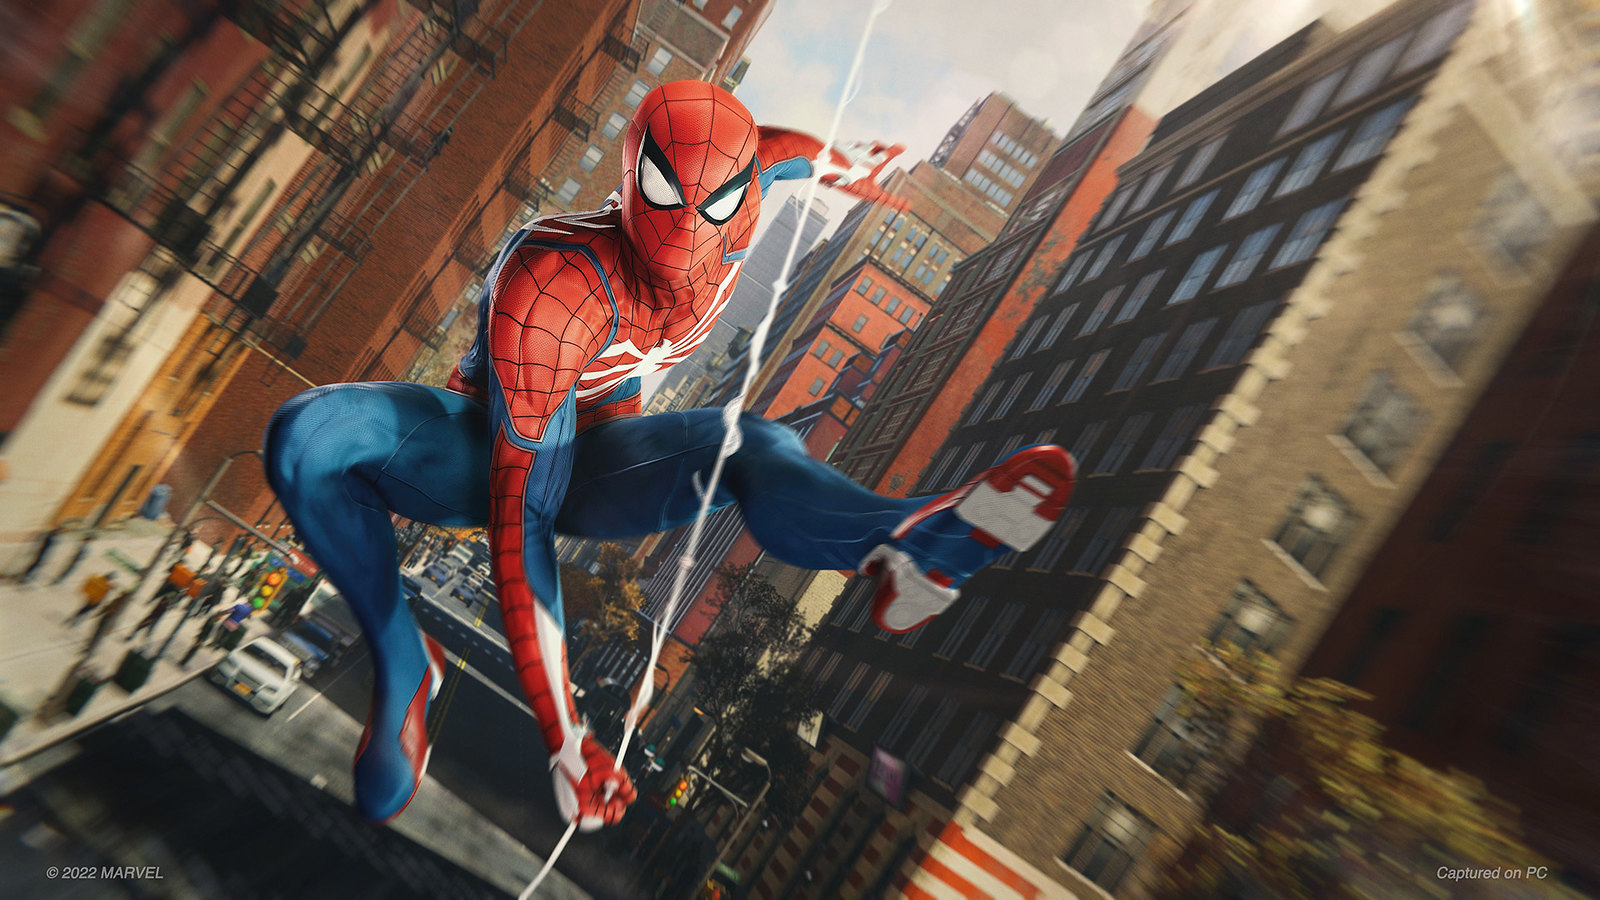 Microsoft Turned Down Exclusivity With Marvel For Spider-Man